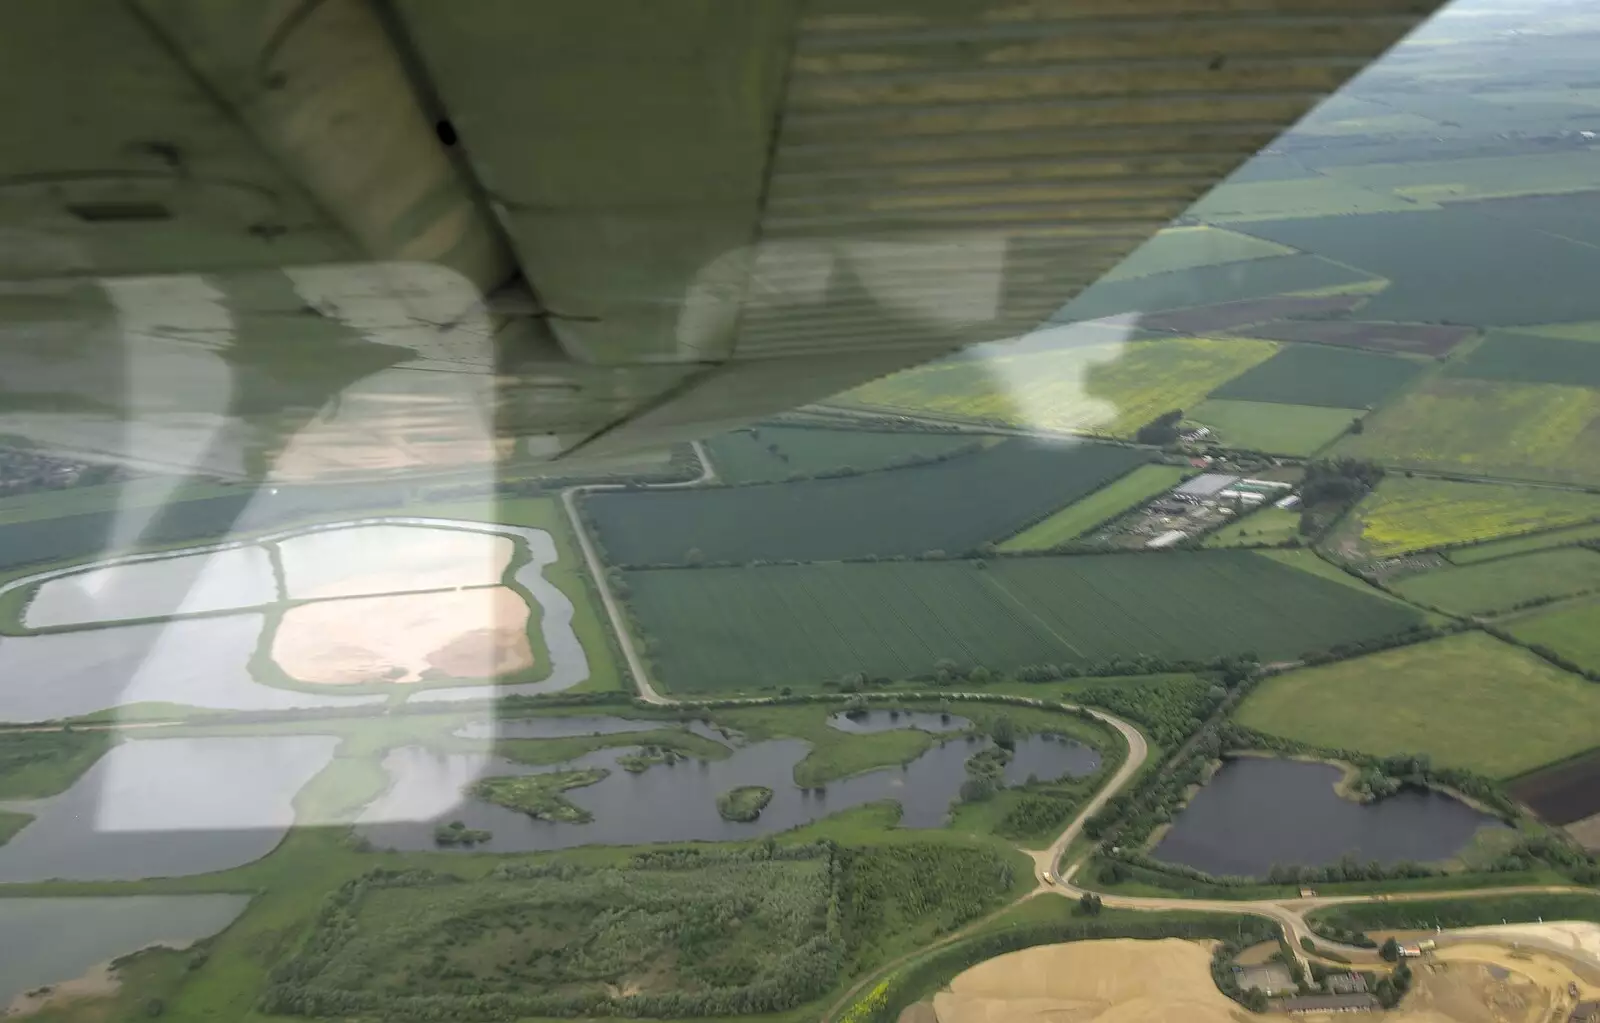 Some flooded fields, from Nosher Flies a Plane, Cambridge Airport, Cambridge - 28th May 2008